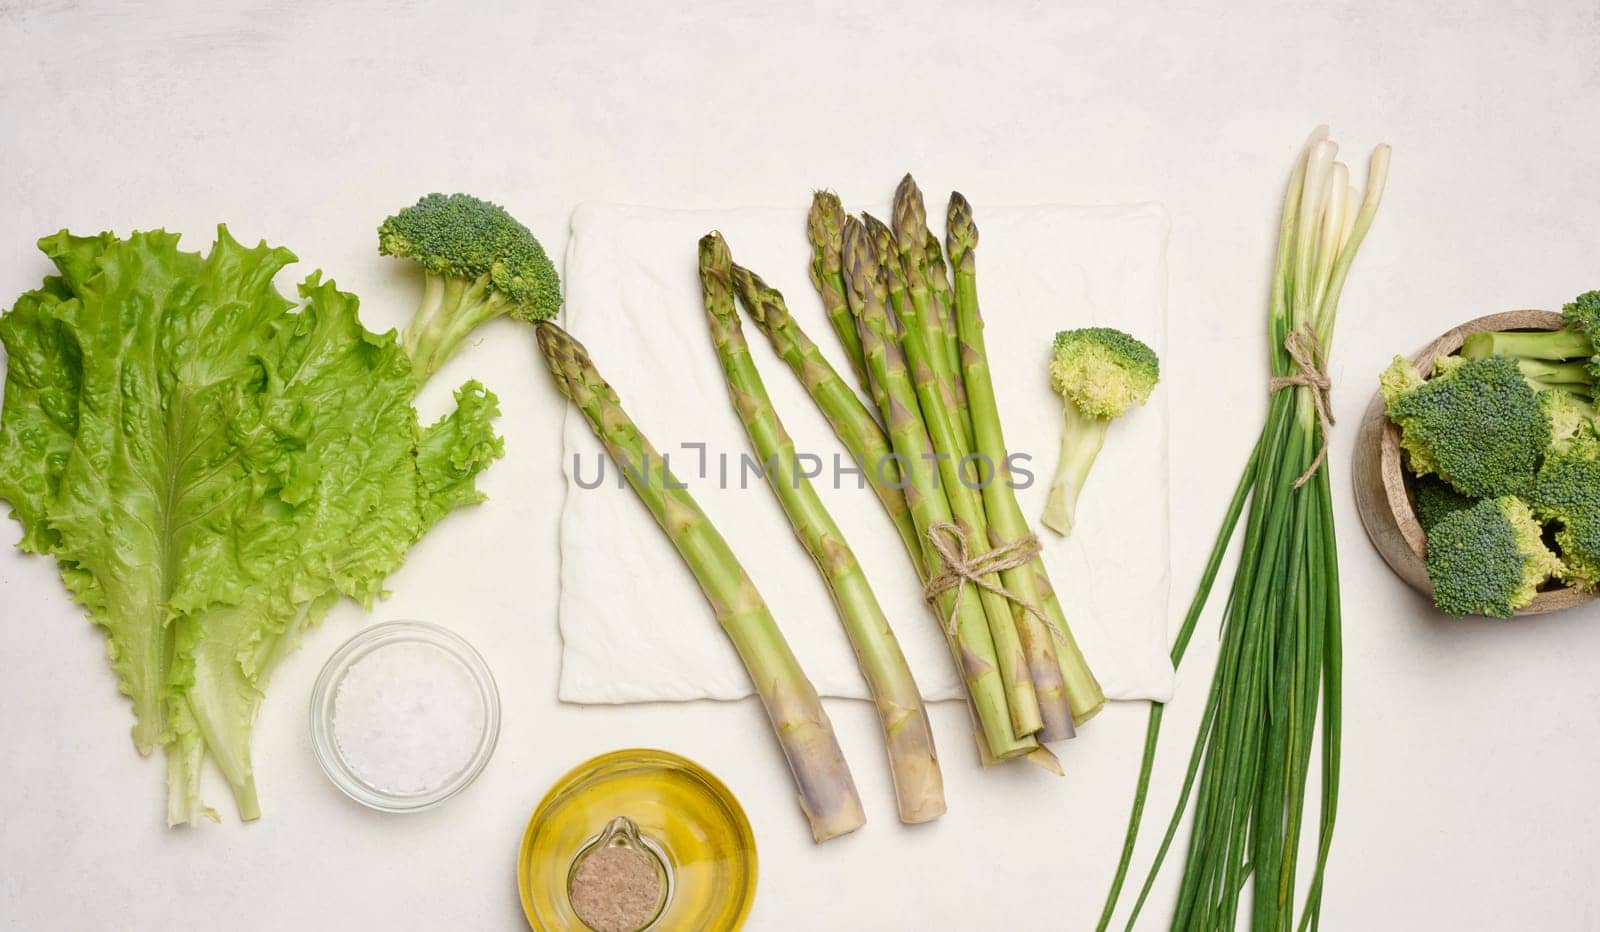 Raw asparagus, broccoli and spices on white background, top view.  by ndanko